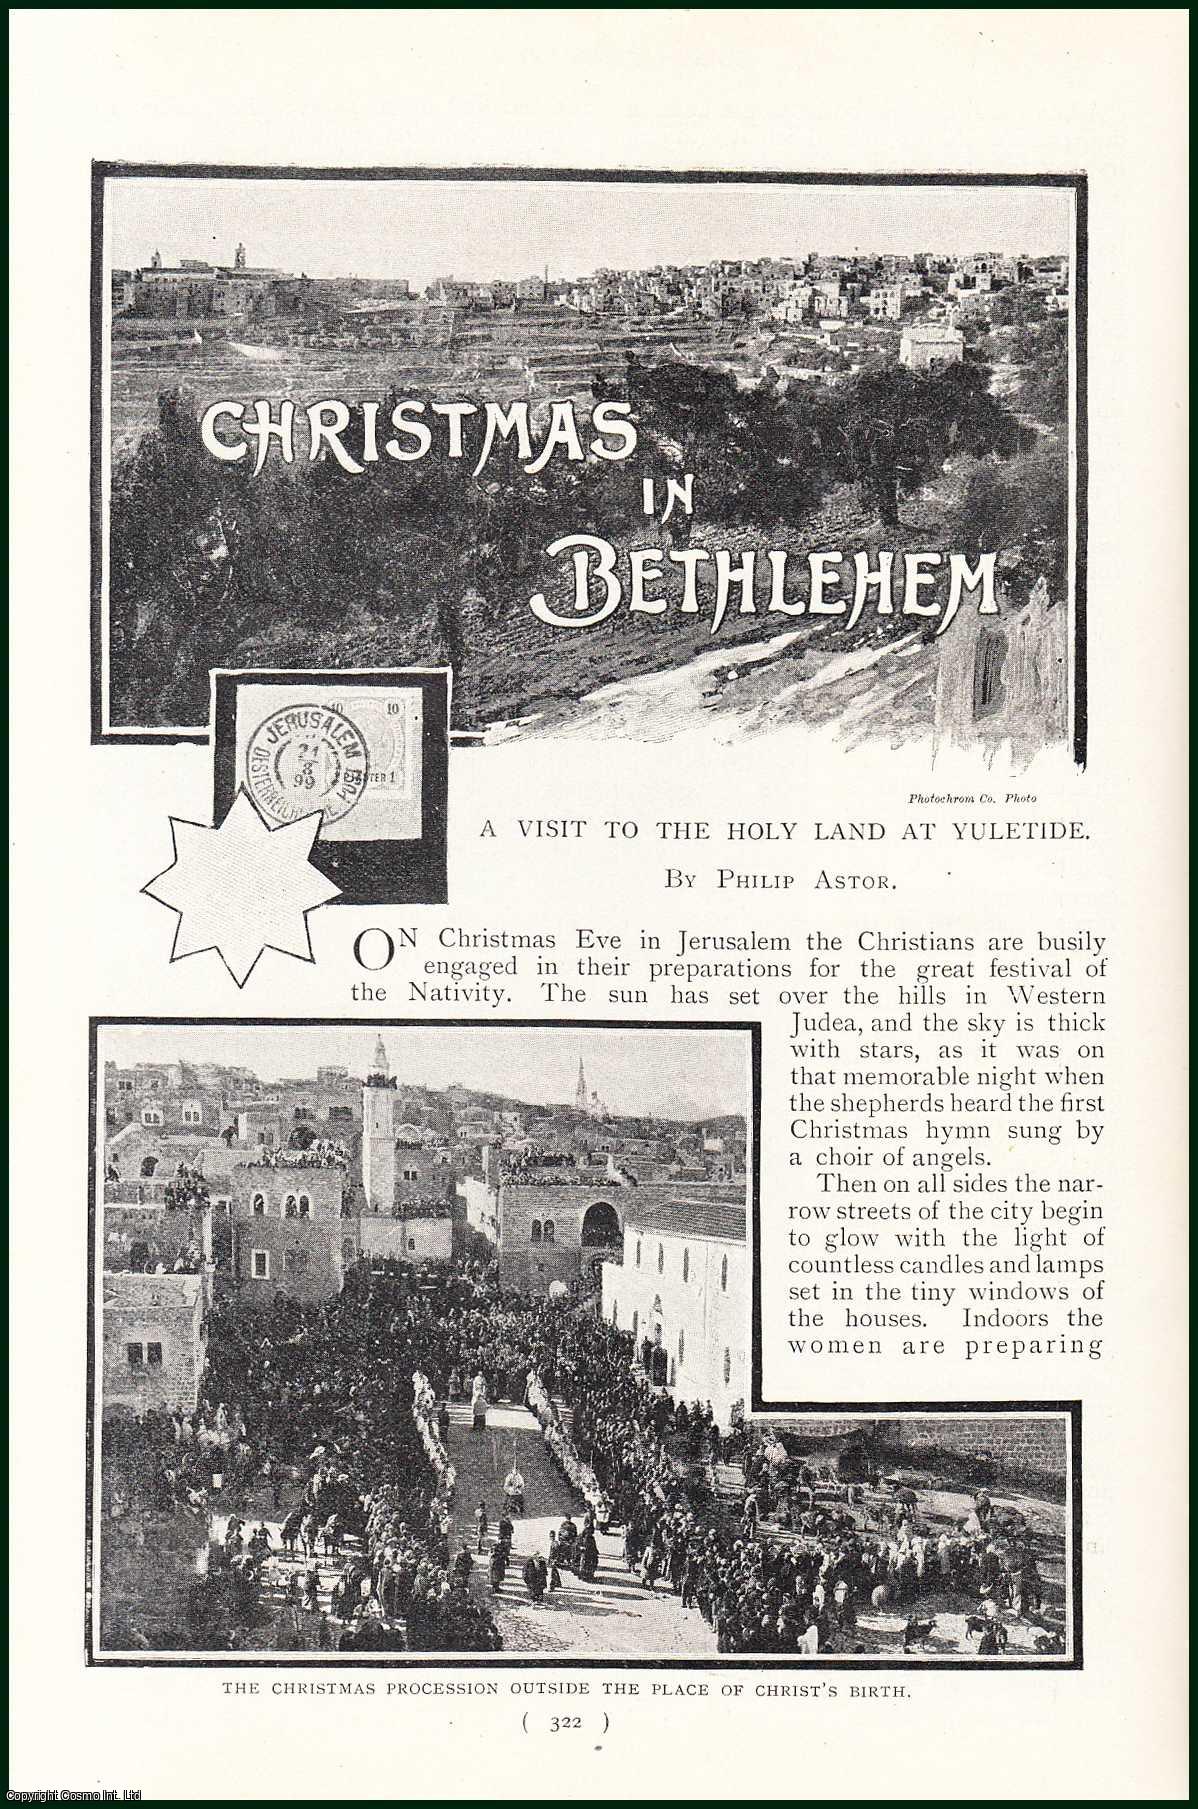 Philip Astor - Christmas in Bethlehem. A Visit to the Holy Land at Yuletide. An uncommon original article from the Harmsworth London Magazine, 1900.